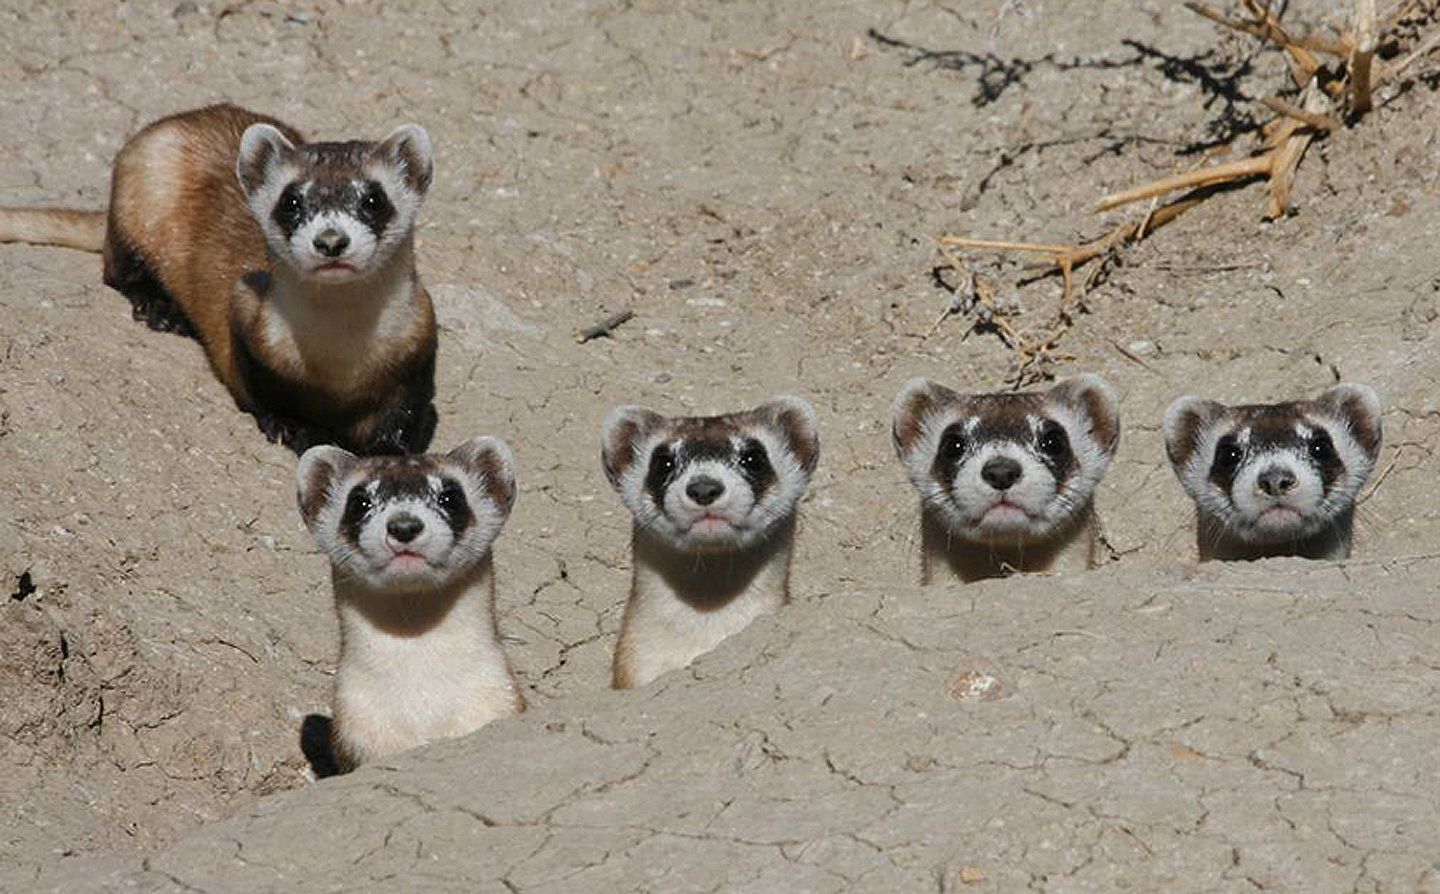 Five black-footed ferrets peeking up atop dirt pile at the camera